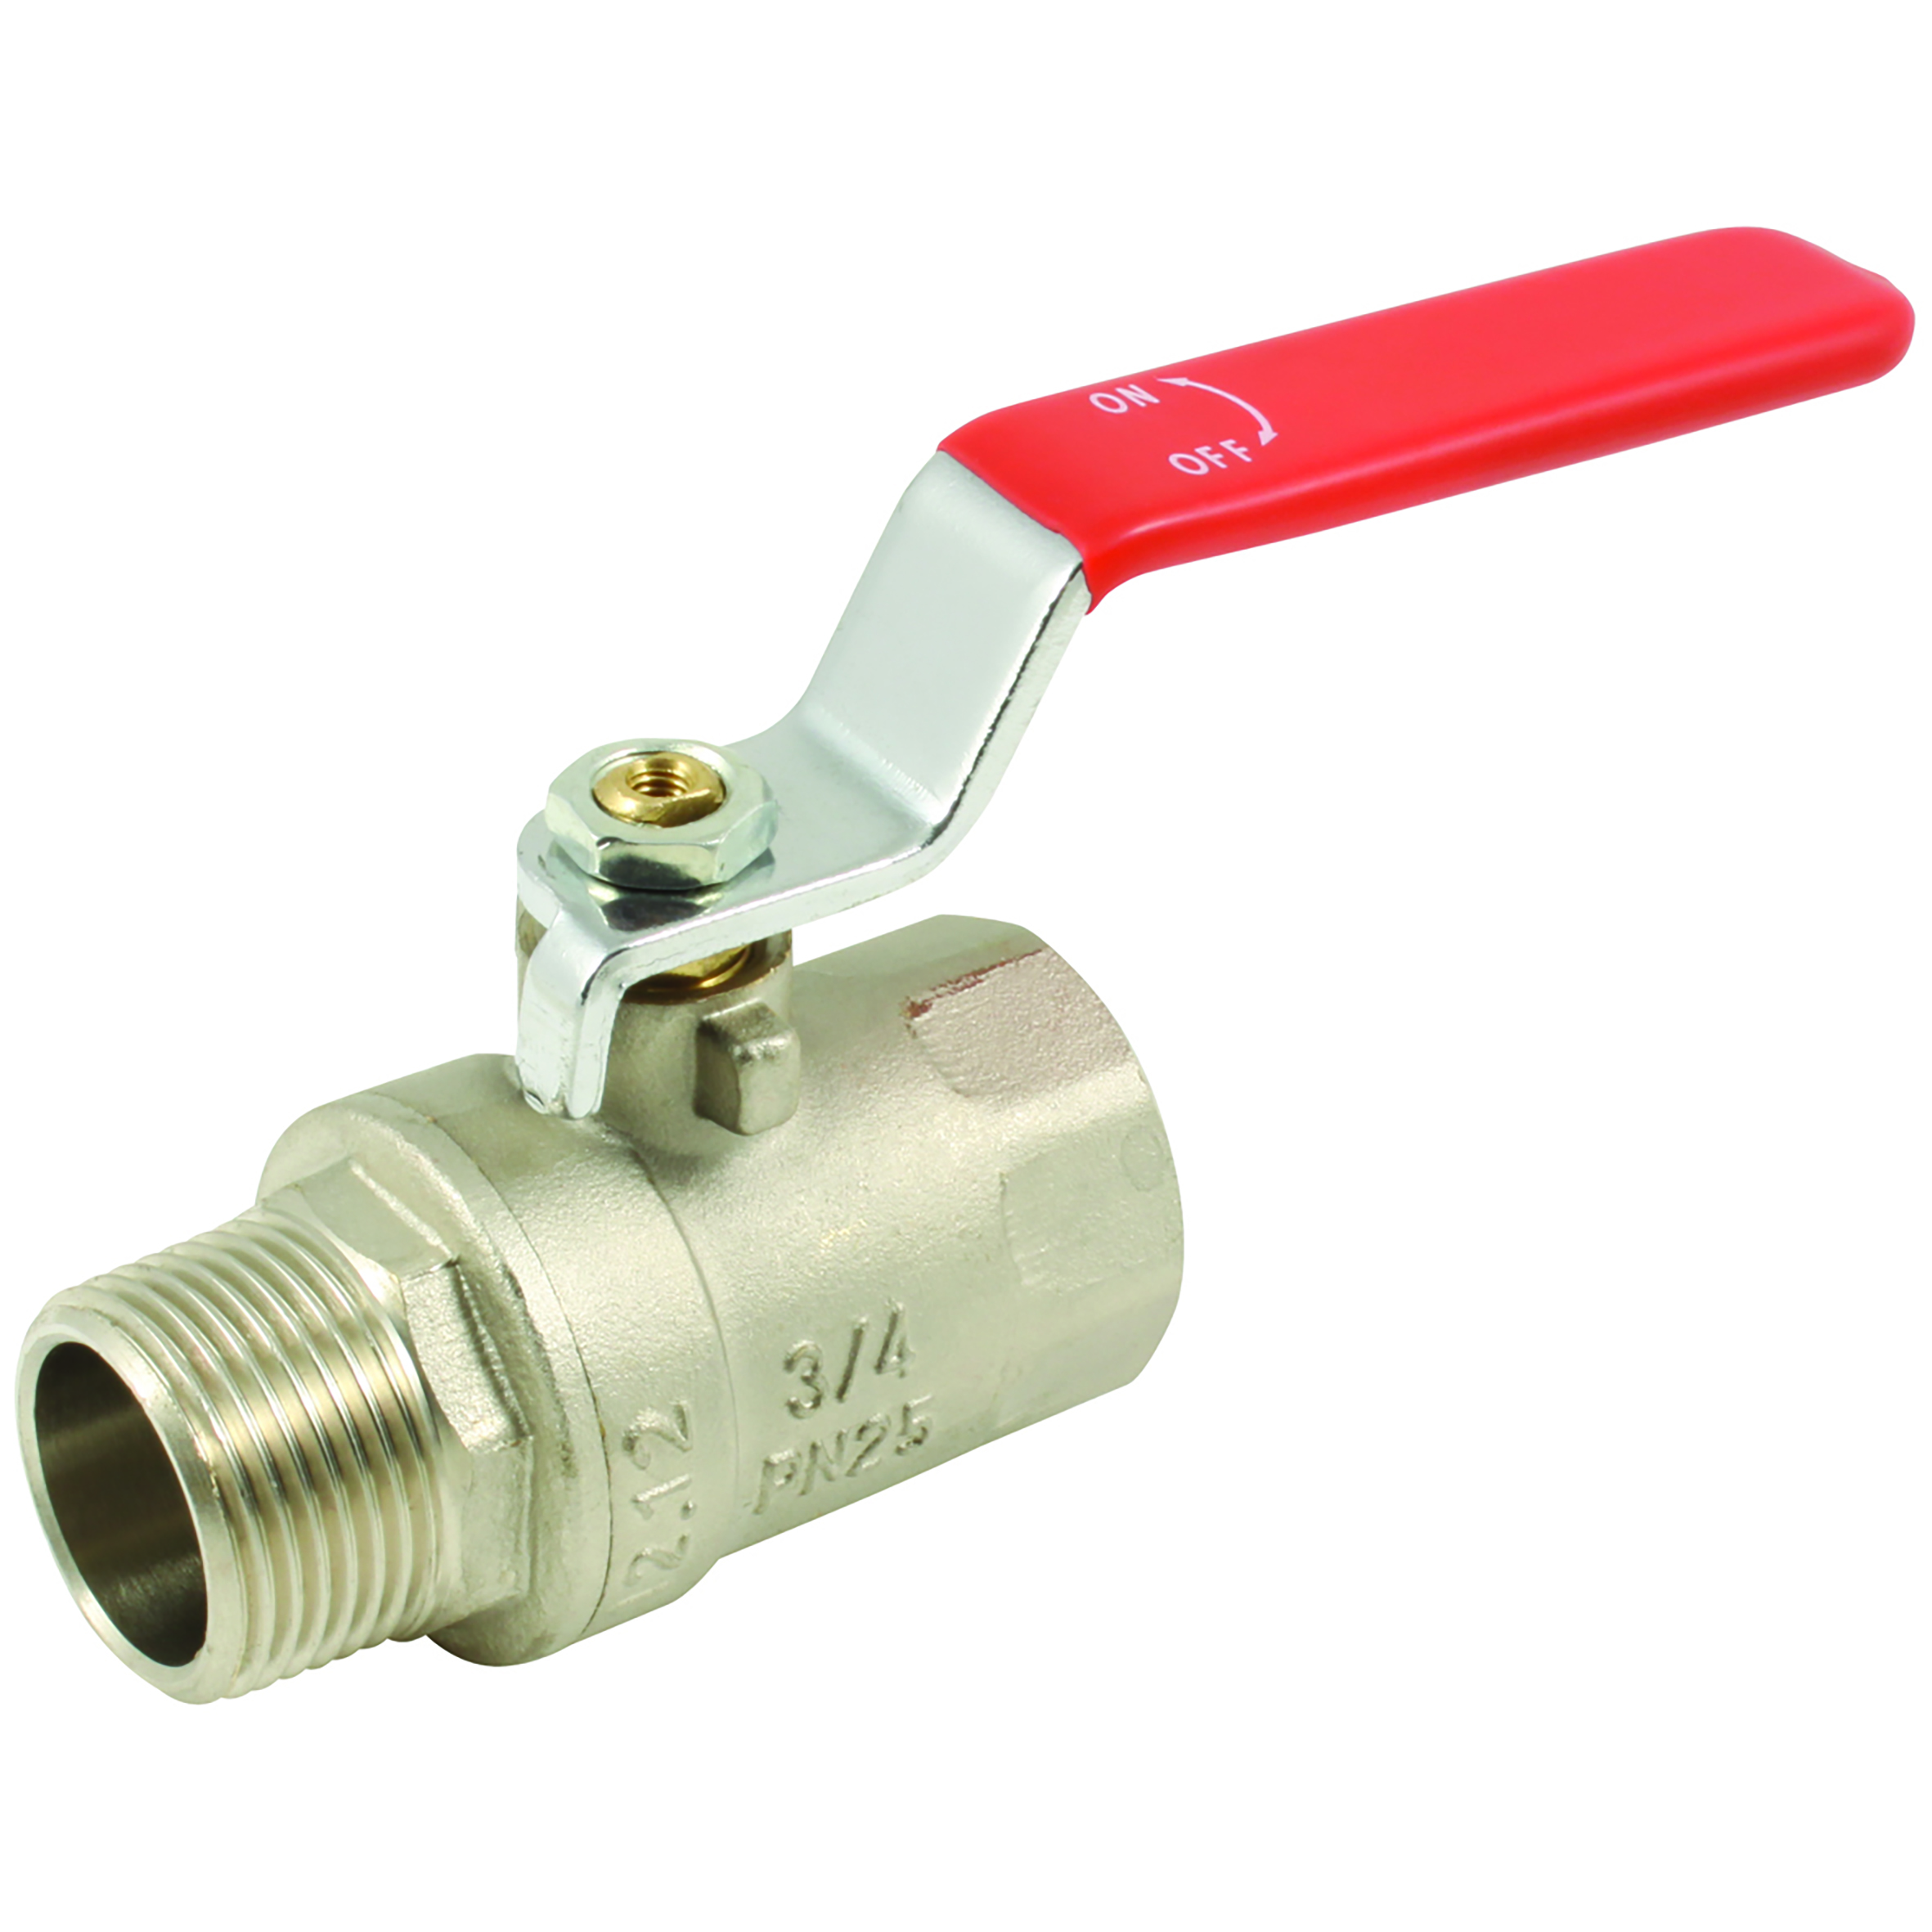 1/2"  BSPP BALL VALVE M/F RED LEVER